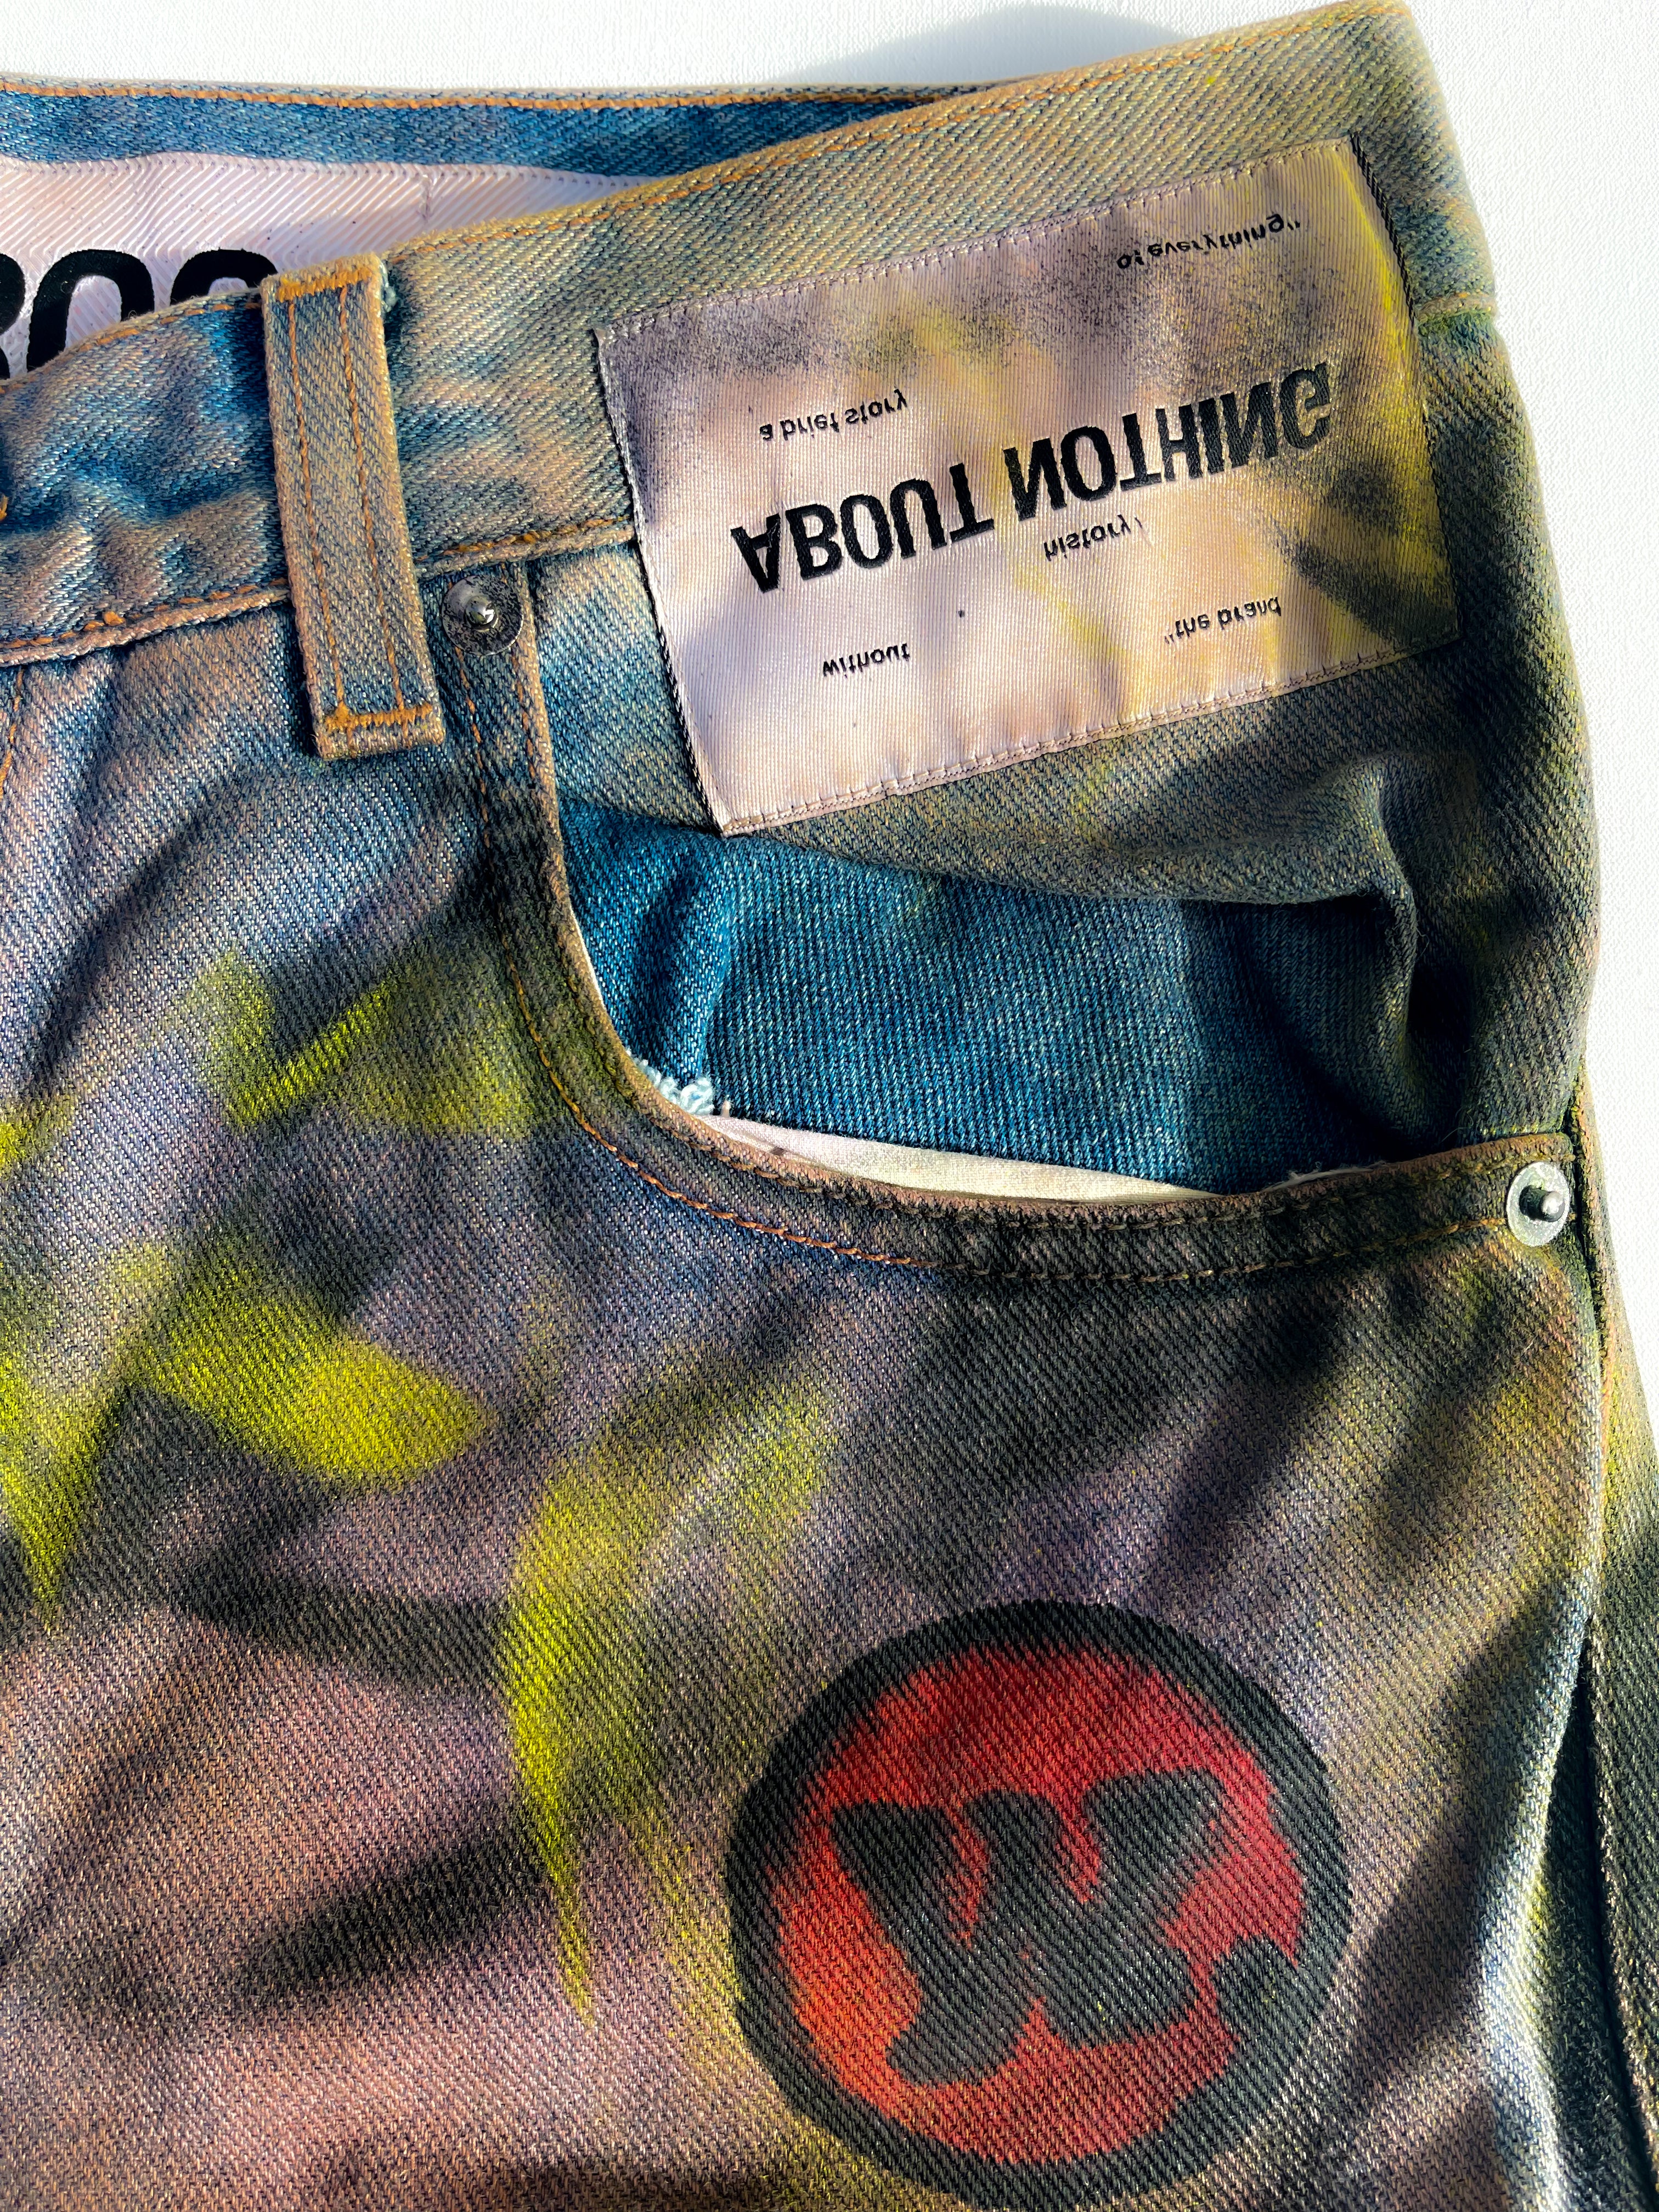 WORLDXIT x ABOUT NOTHING // 1 OF 1 ROCKSPORT JEANS D.04 [MEDIUM]